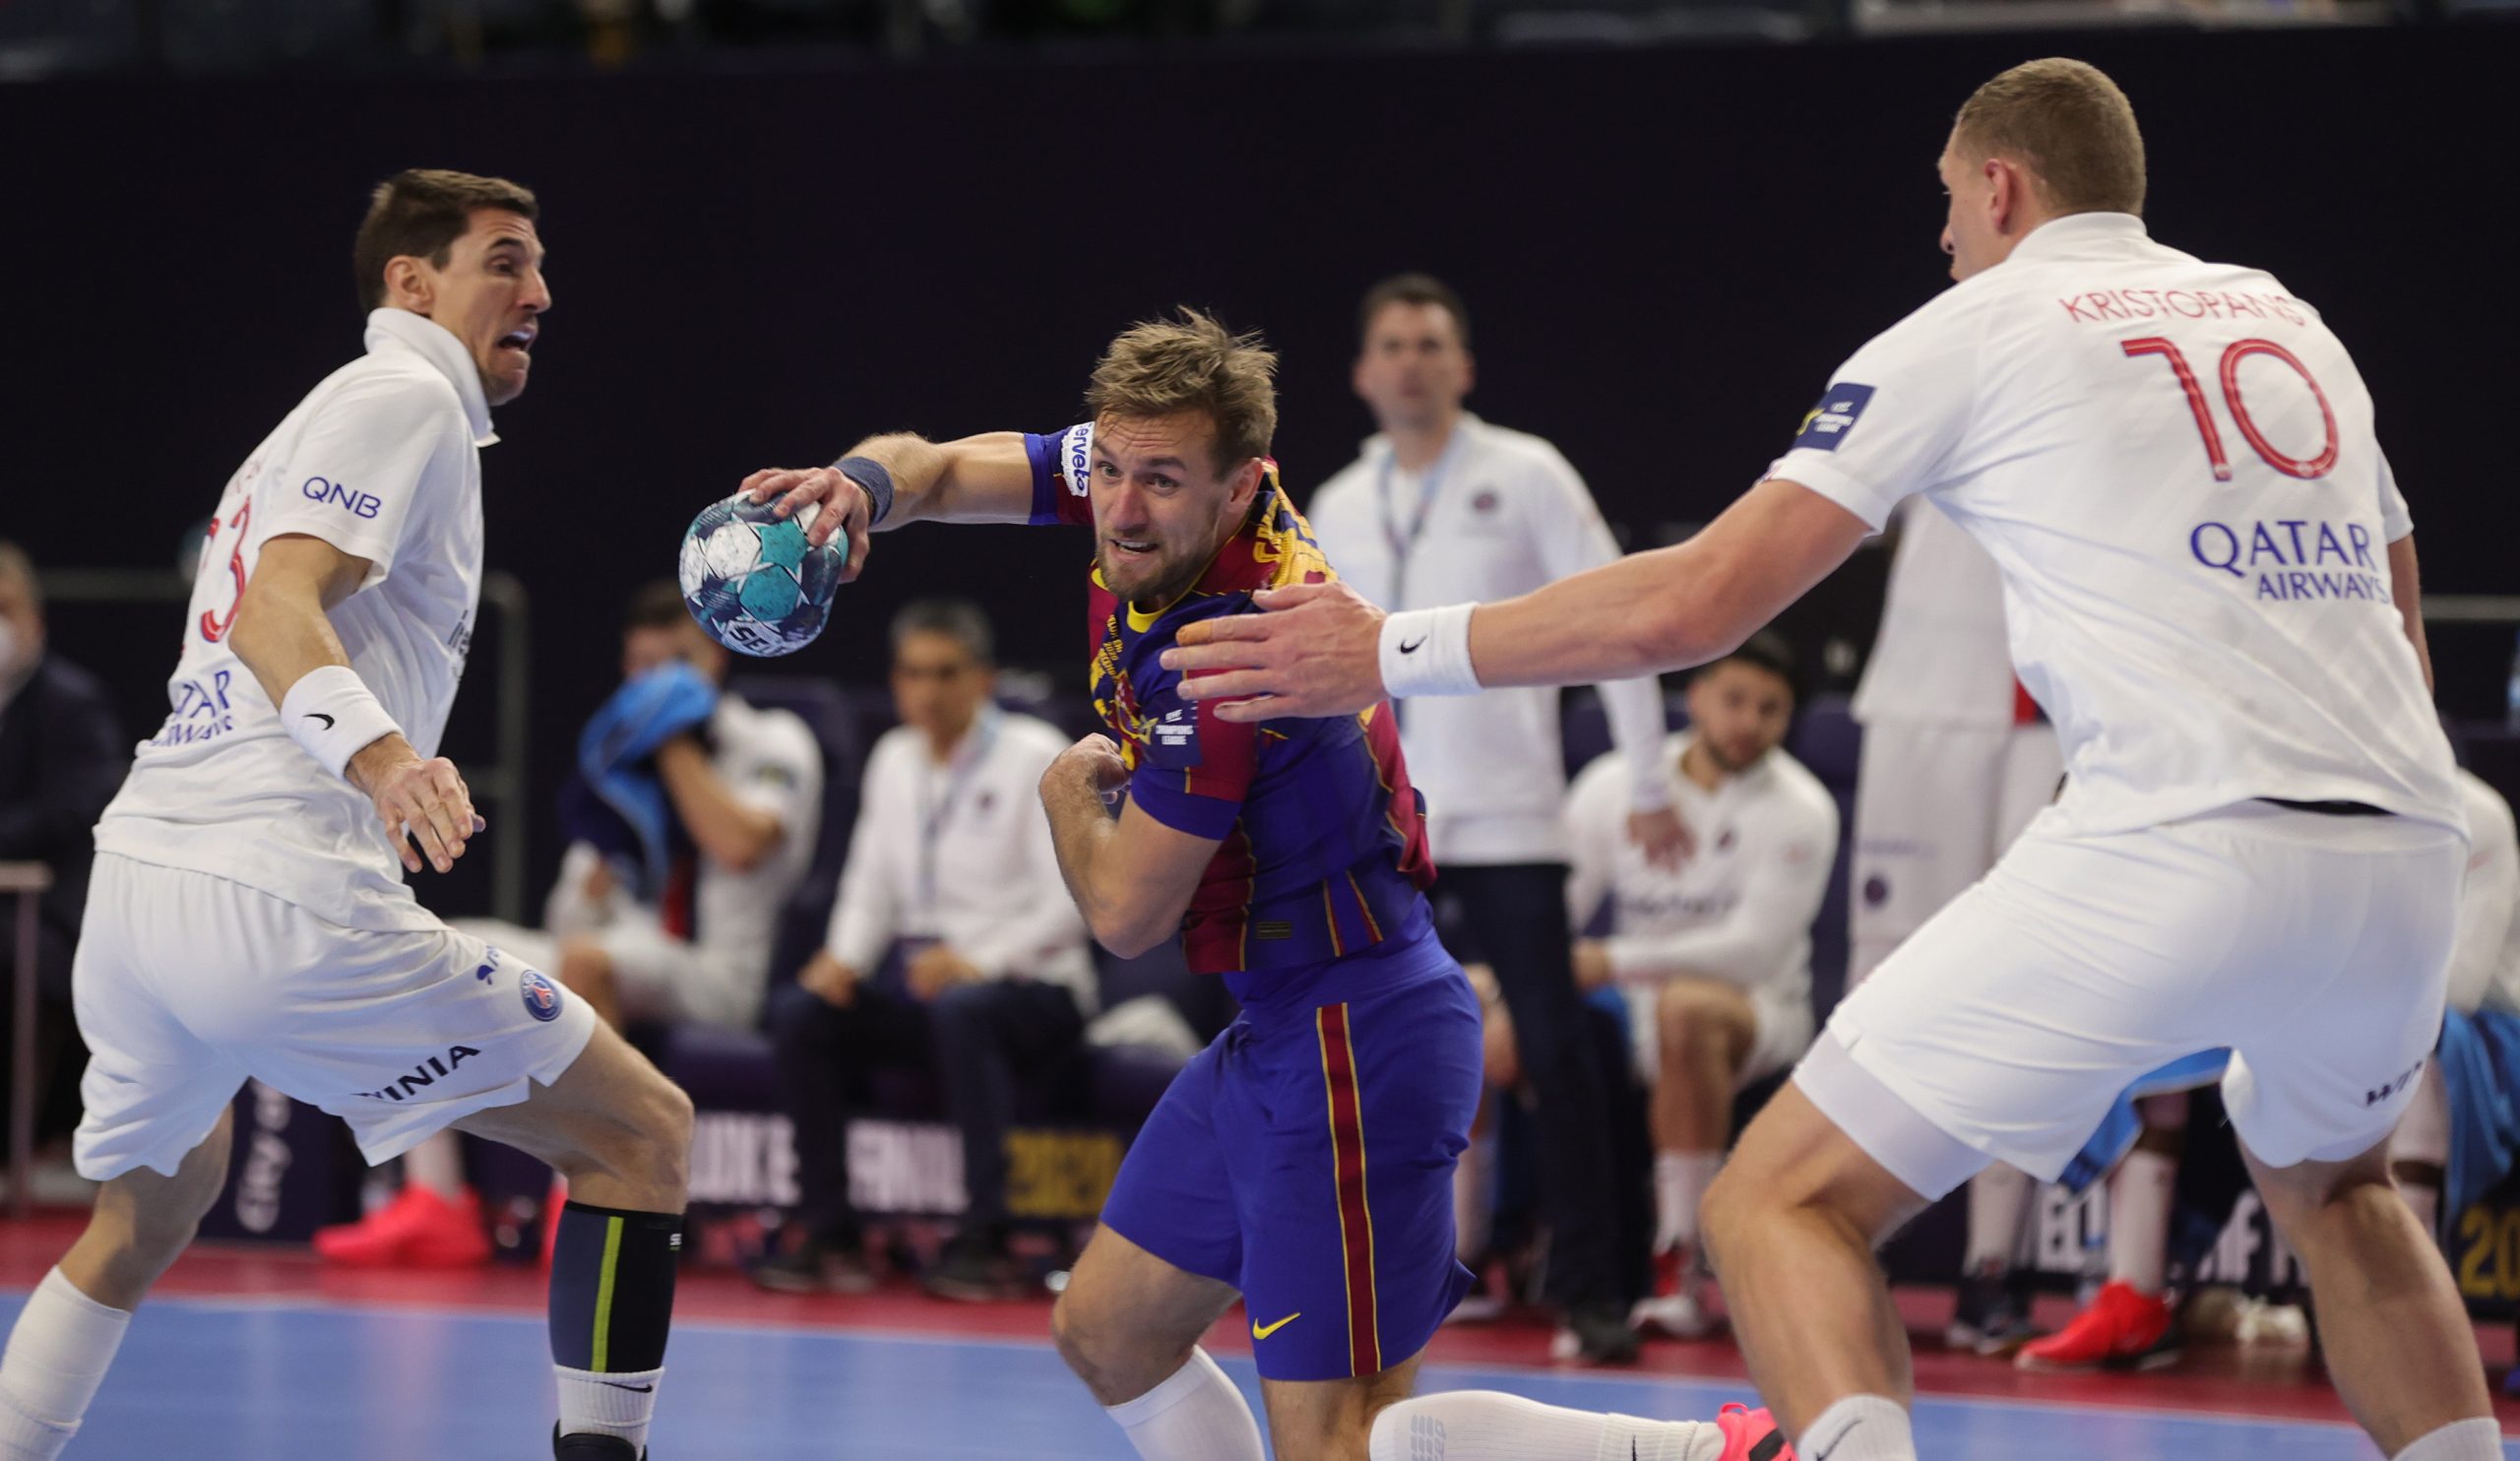 epa08908234 Barcelona's Luca Cindric (C) in action against PSG's Dainis Kristopans (R) and PSG's Viran Morros (L) during the 2020 EHF FINAL4 Handball Champions League semi final match between FC Barcelona and Paris Saint-Germain in Cologne, Germany, 28 December 2020.  EPA/FRIEDEMANN VOGEL